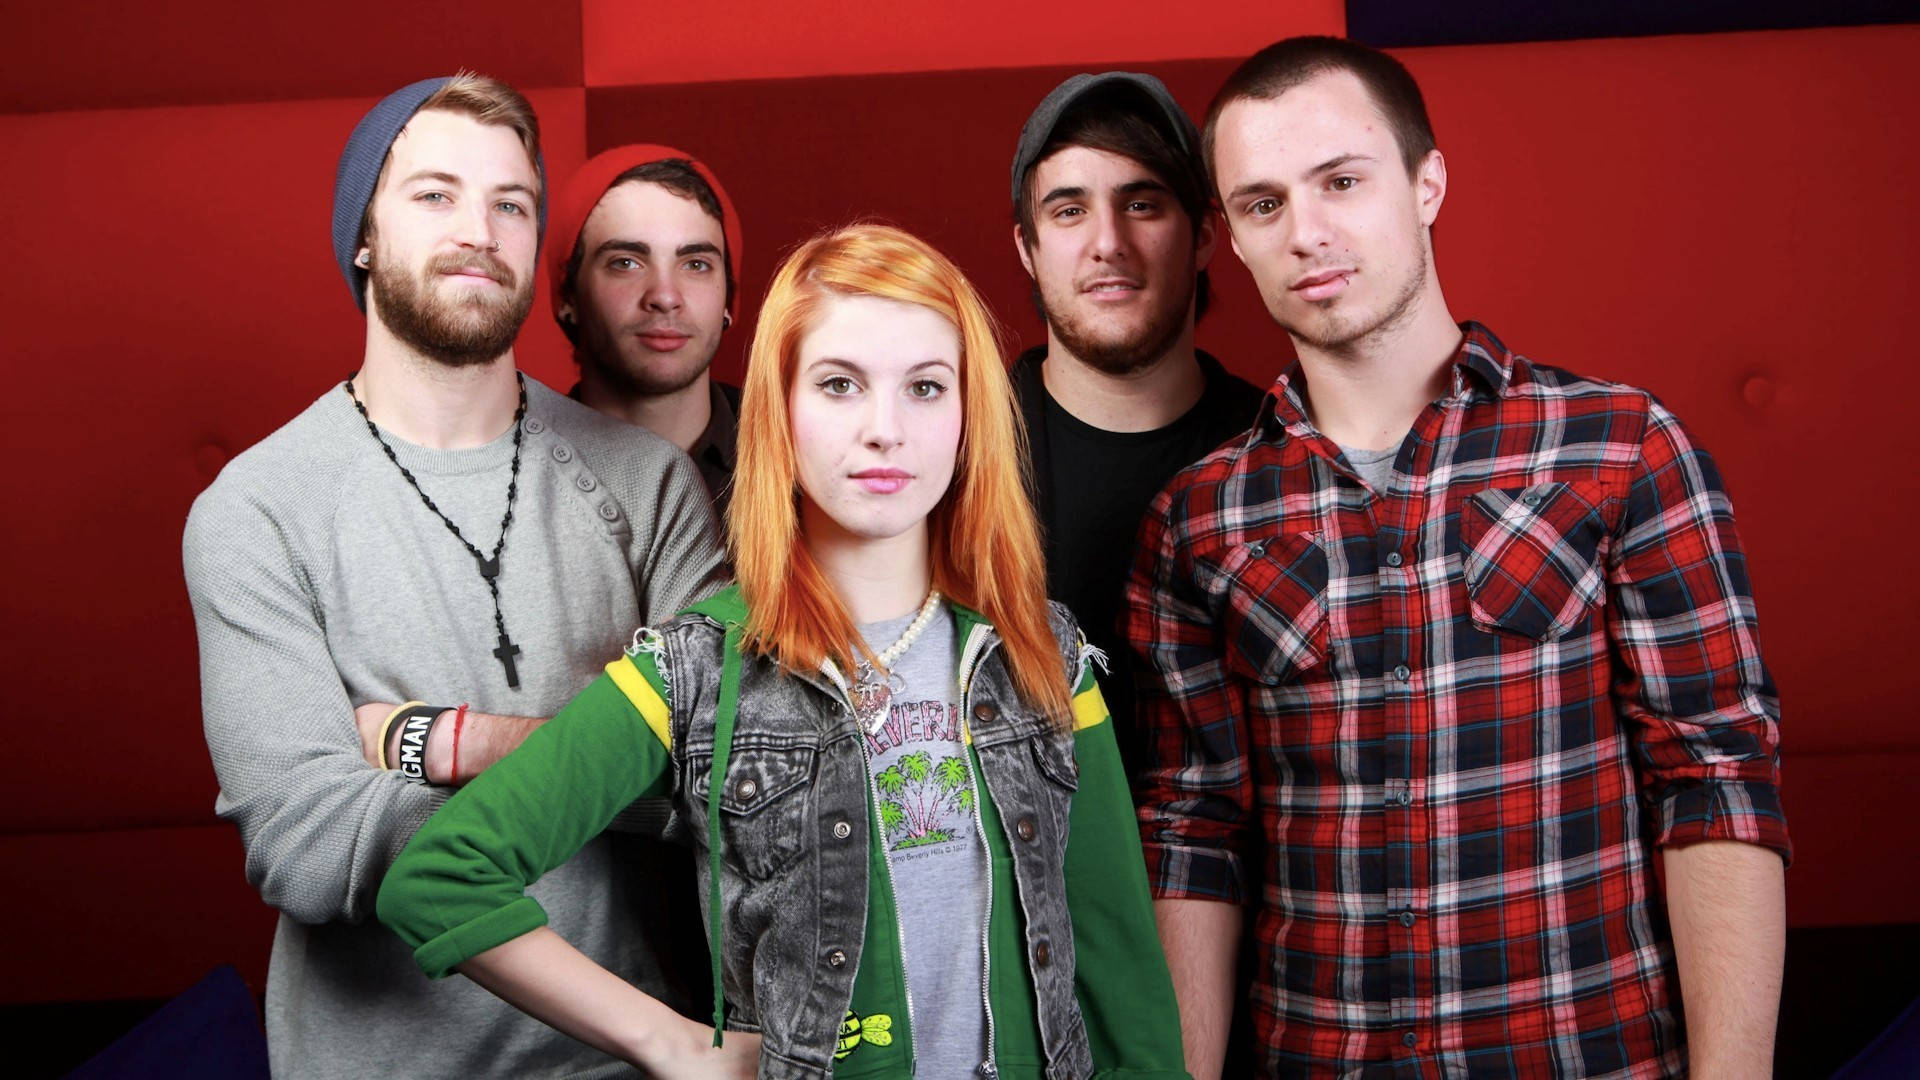 Paramore Rock Band 2009 Background